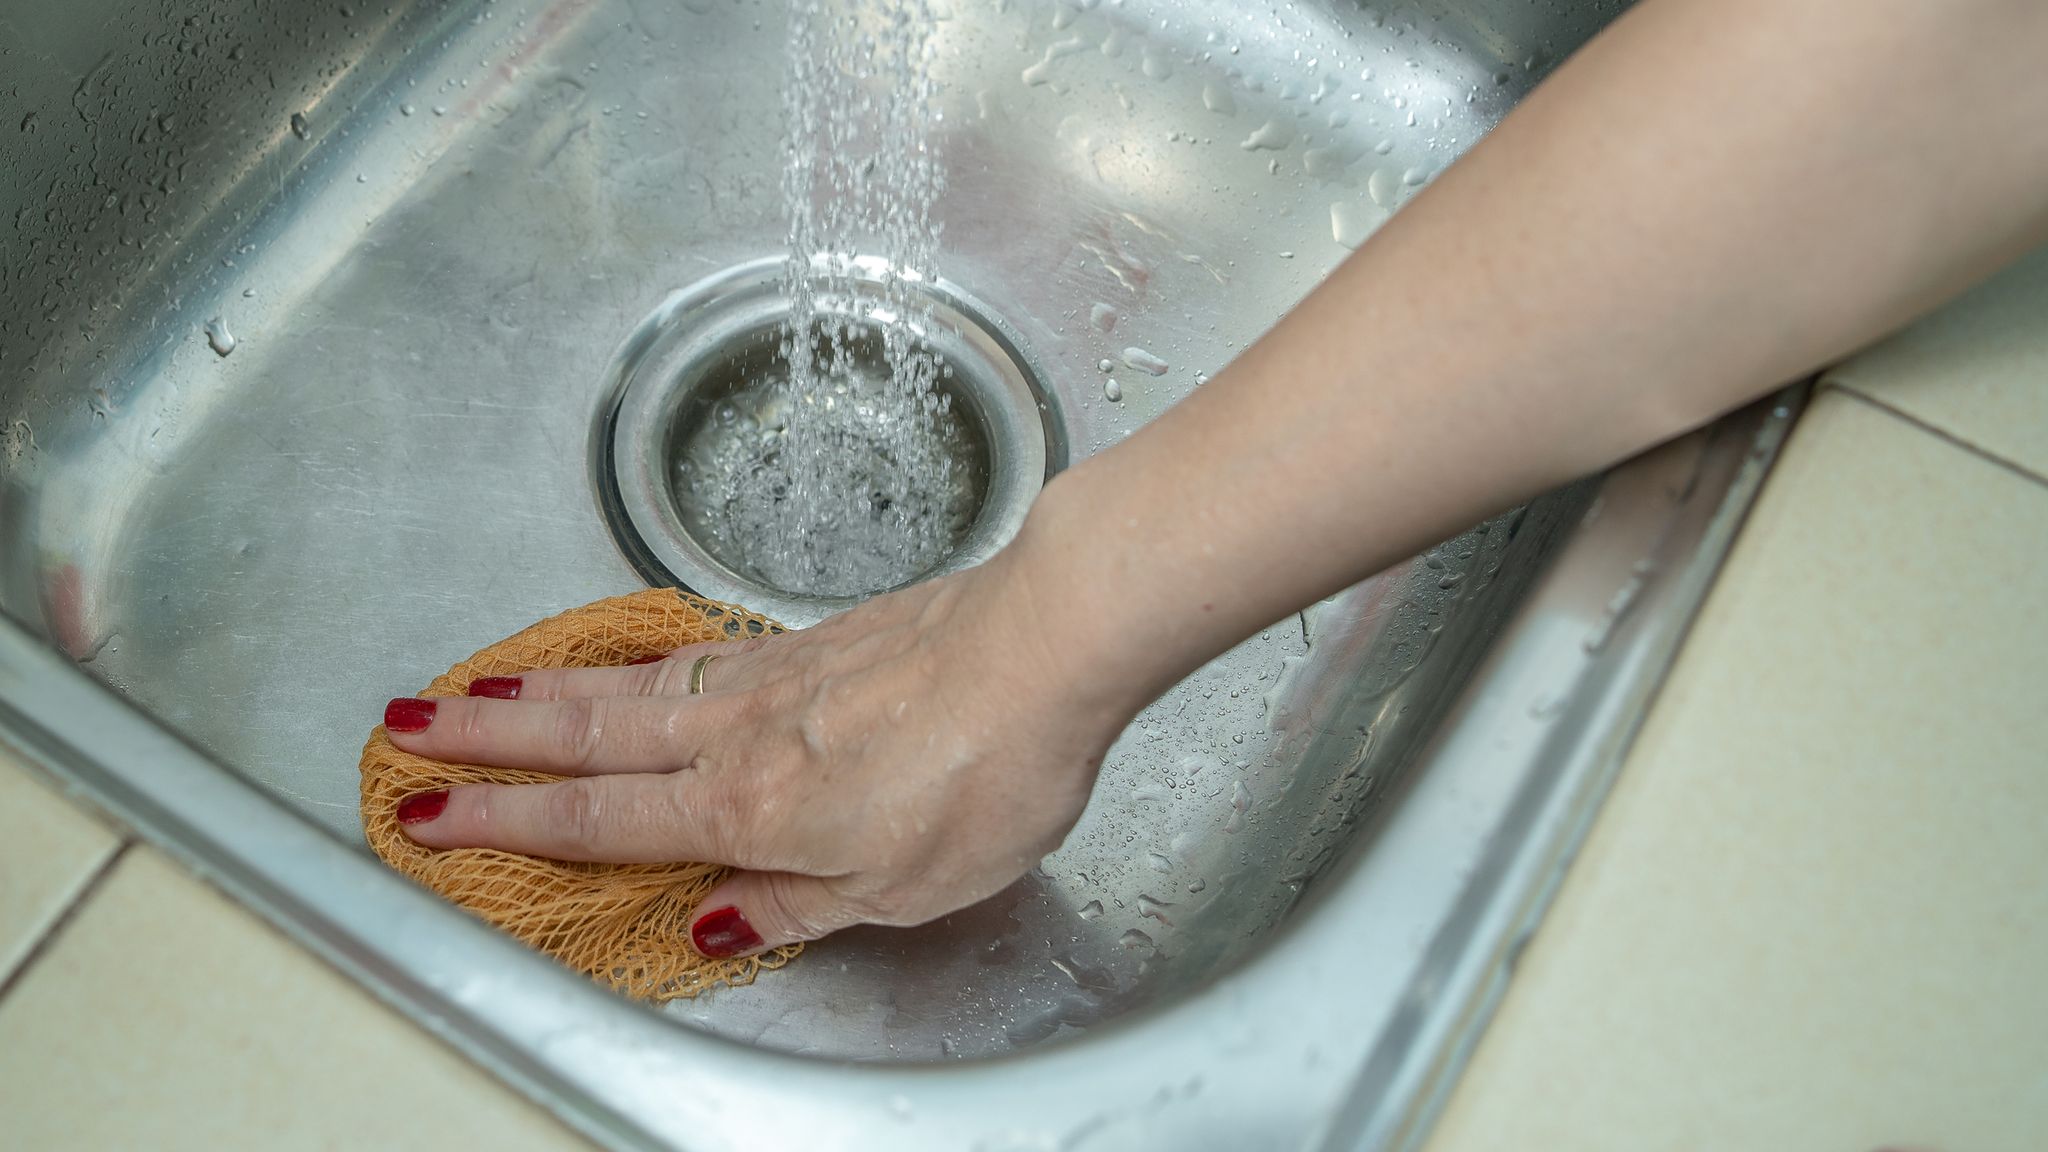 A person cleaning the sink | Source: Getty Images